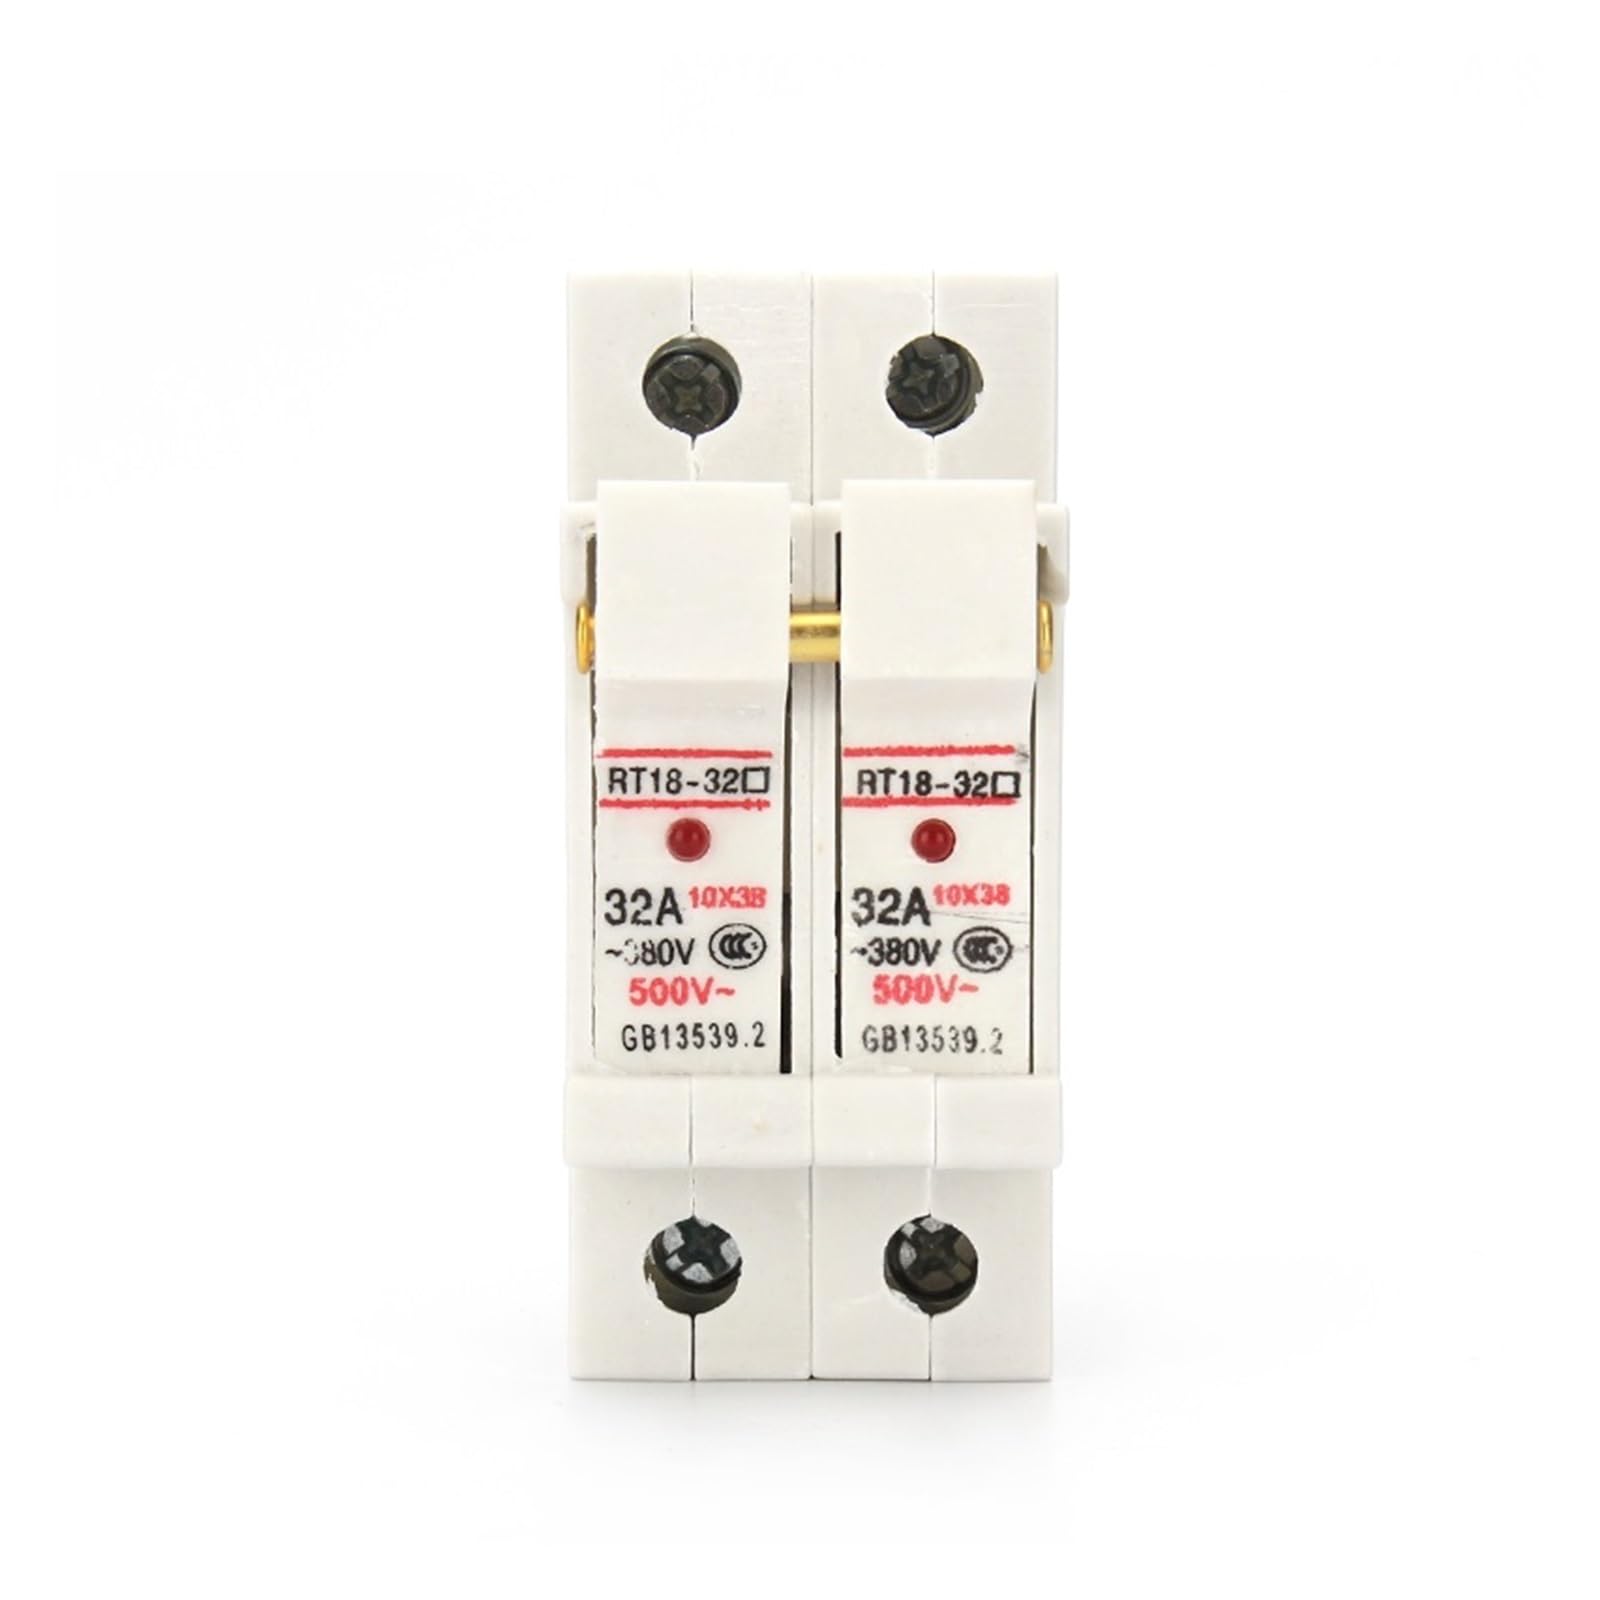 1P 2P 3P 4P RT18-32X AC ~380V Copper Fuse Holder 500V 10x38mm DIN rail mounting Fuse holder bottom adapter with Fuse RUAJOGYNVM(1A,2P) von RUAJOGYNVM